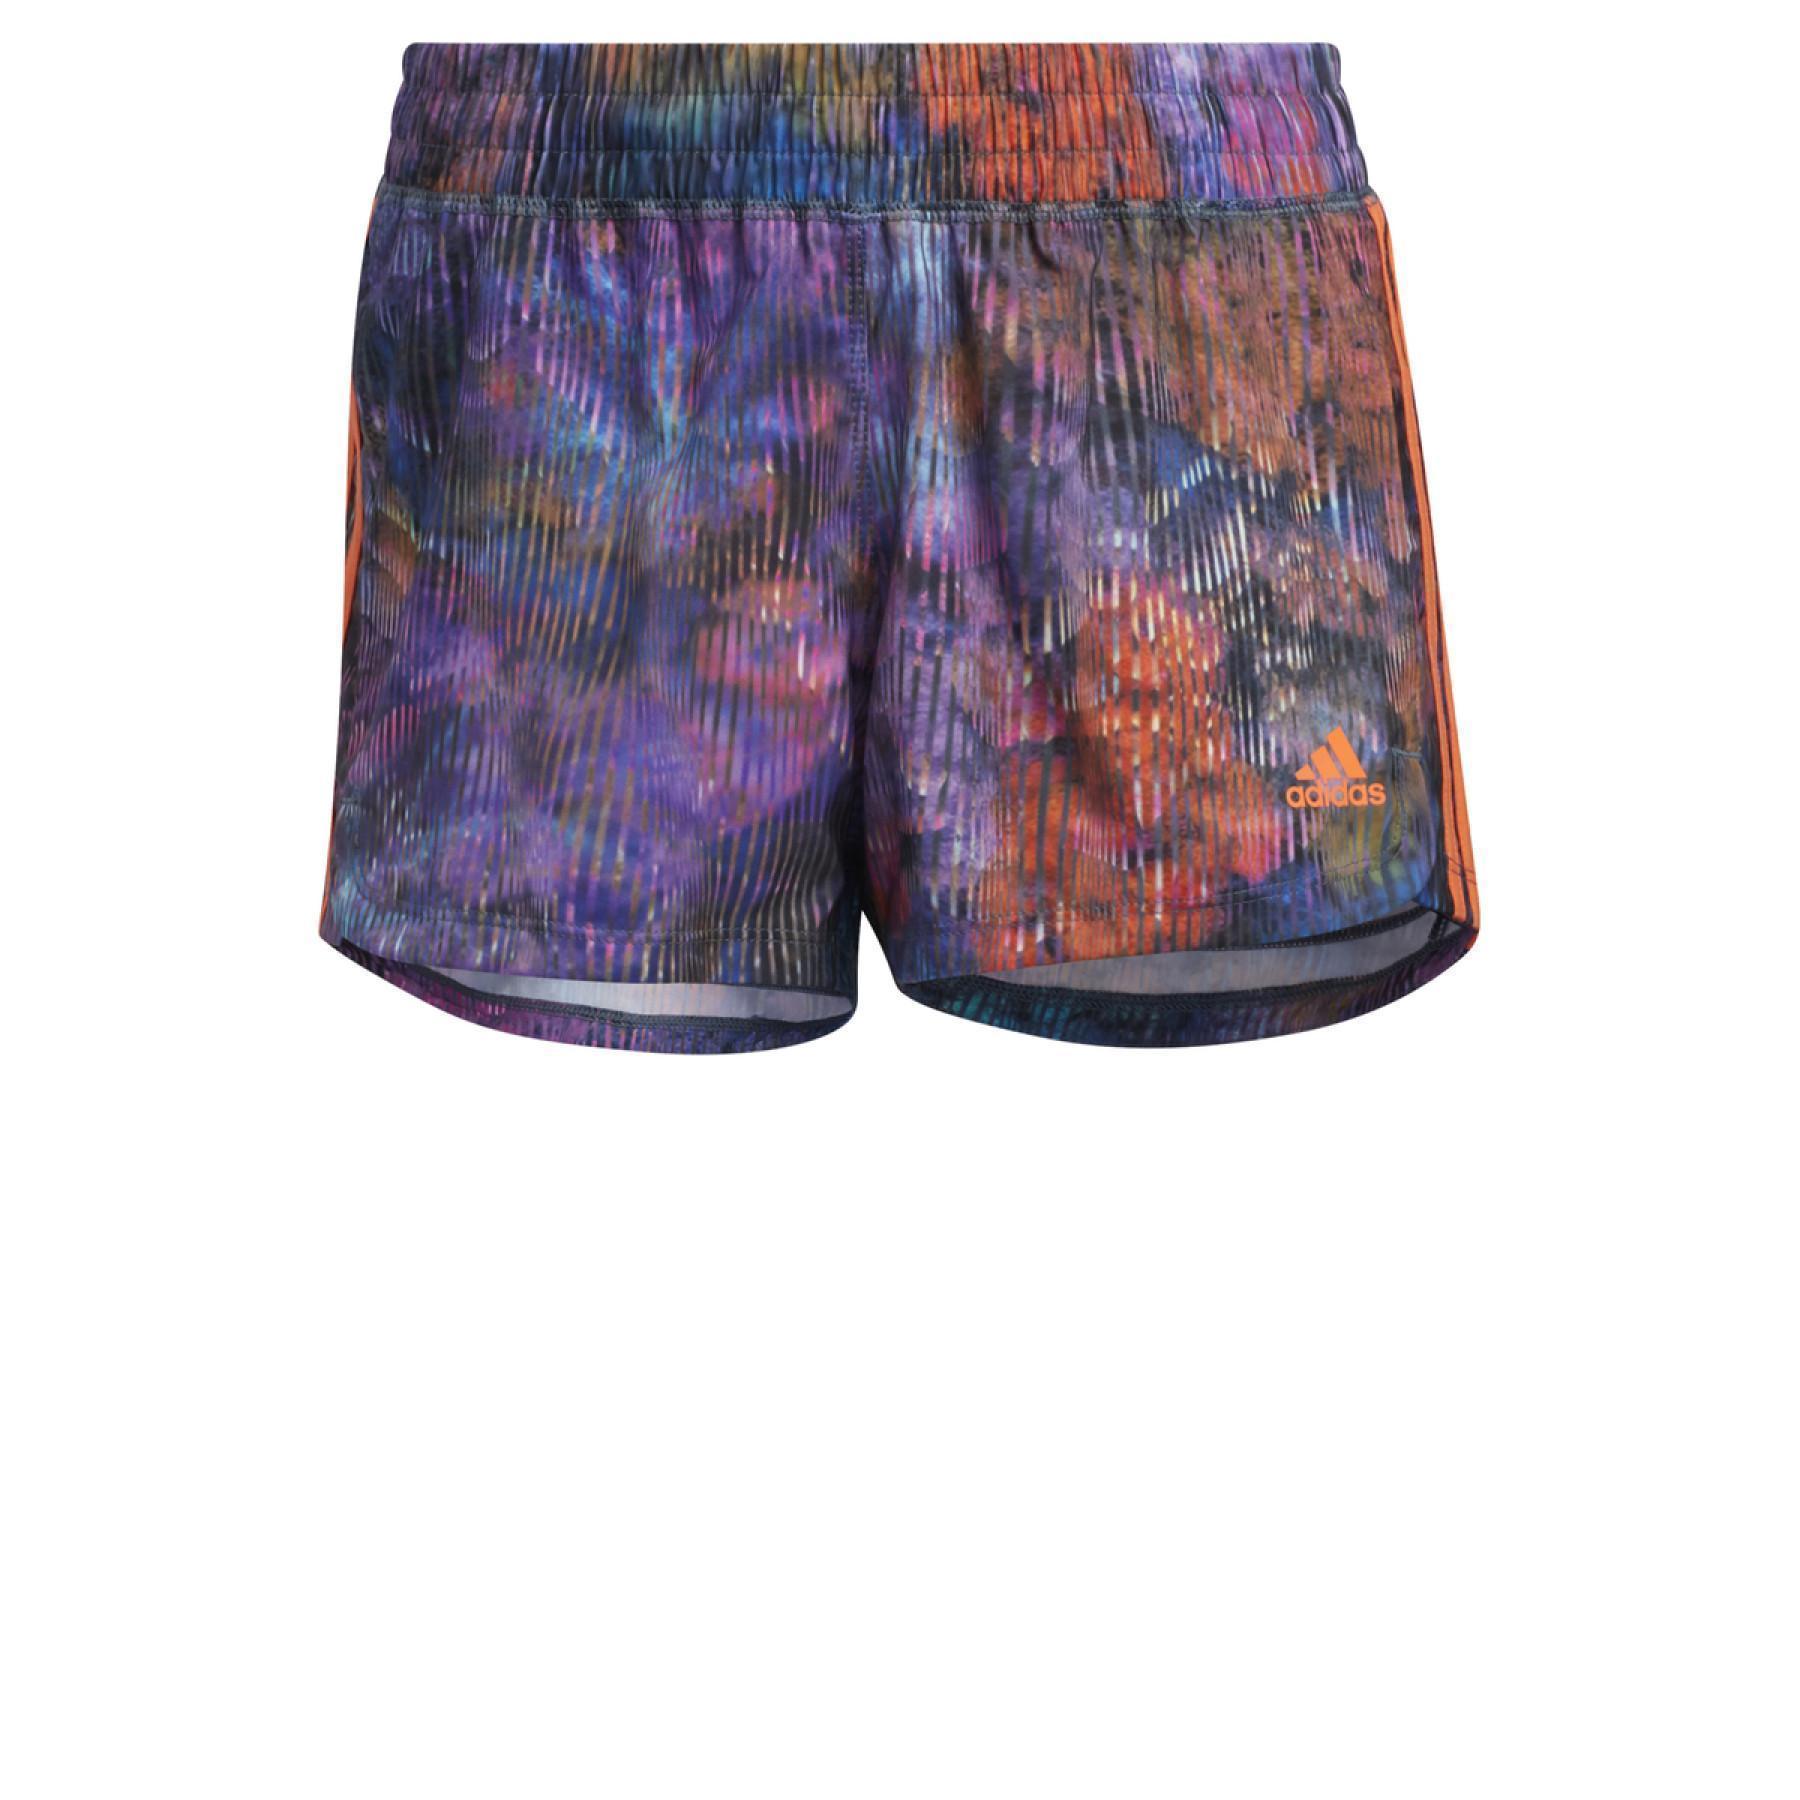 Short femme adidas 3S Woven Pacer Floral